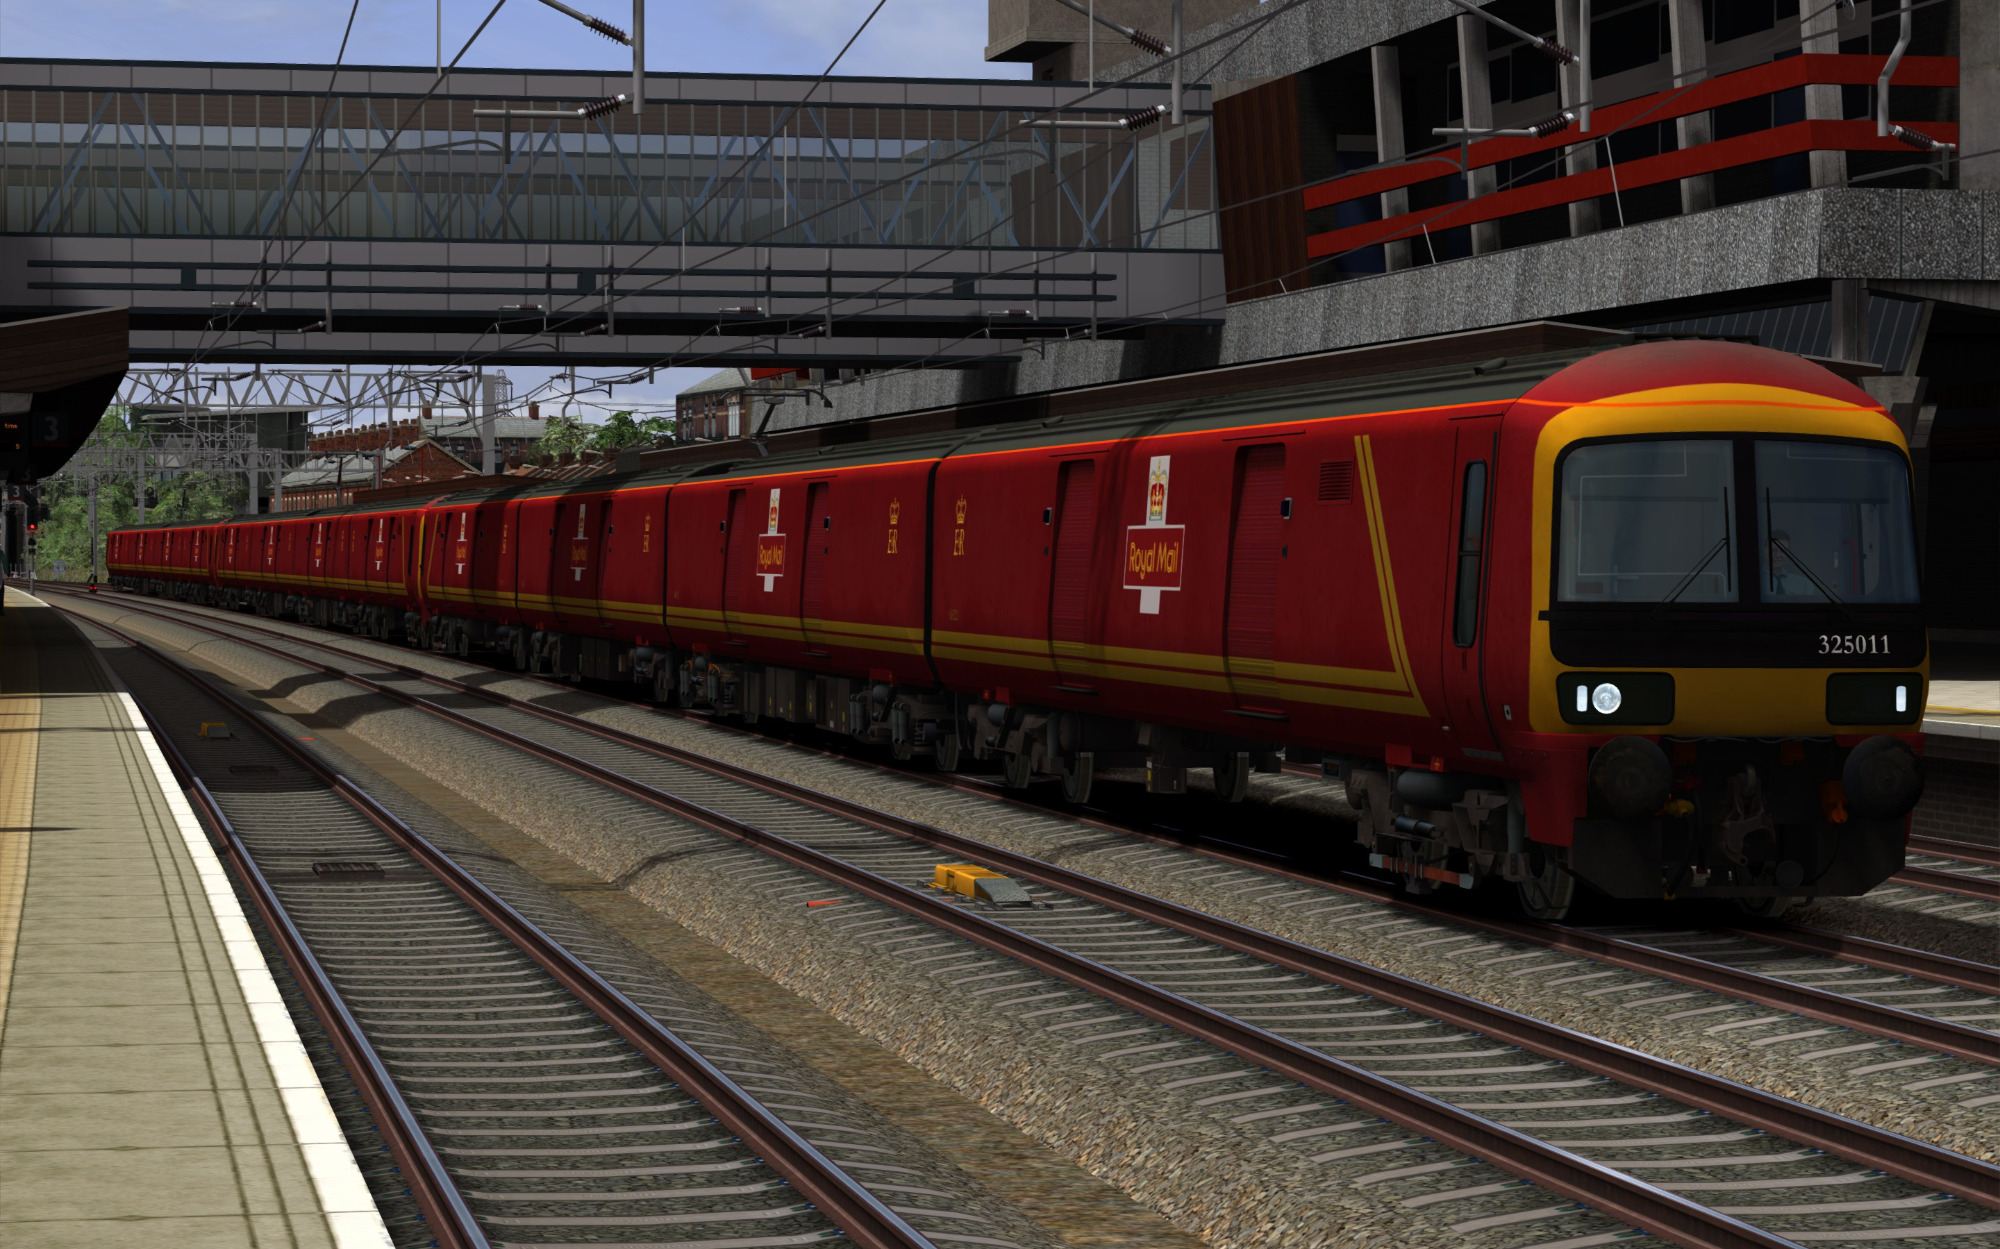 Image showing a screenshot of the Class 325 EMU with the DPSimulation branding pack applied